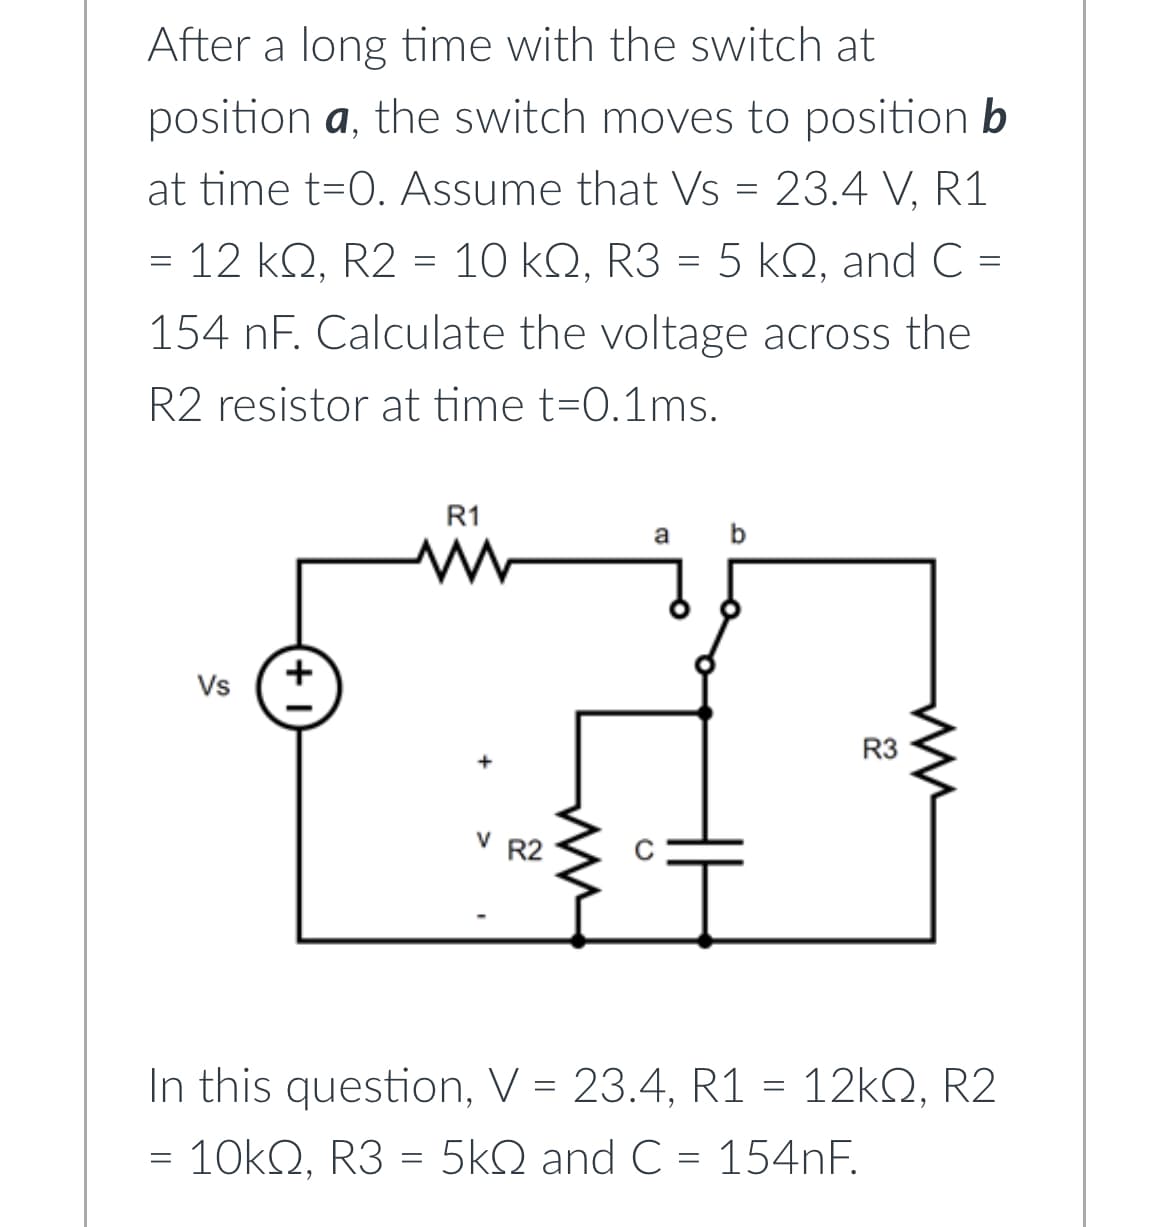 After a long time with the switch at
position a, the switch moves to position b
at time t=0. Assume that Vs = 23.4 V, R1
= 12 kQ, R2 = 10 kQ, R3 = 5 kQ, and C =
154 nF. Calculate the voltage across the
R2 resistor at time t=0.1ms.
=
Vs
+
R1
www
V R2
a
b
HI
R3
ww
In this question, V = 23.4, R1 = 12kQ, R2
= 10kQ, R3 = 5kQ and C = 154nF.